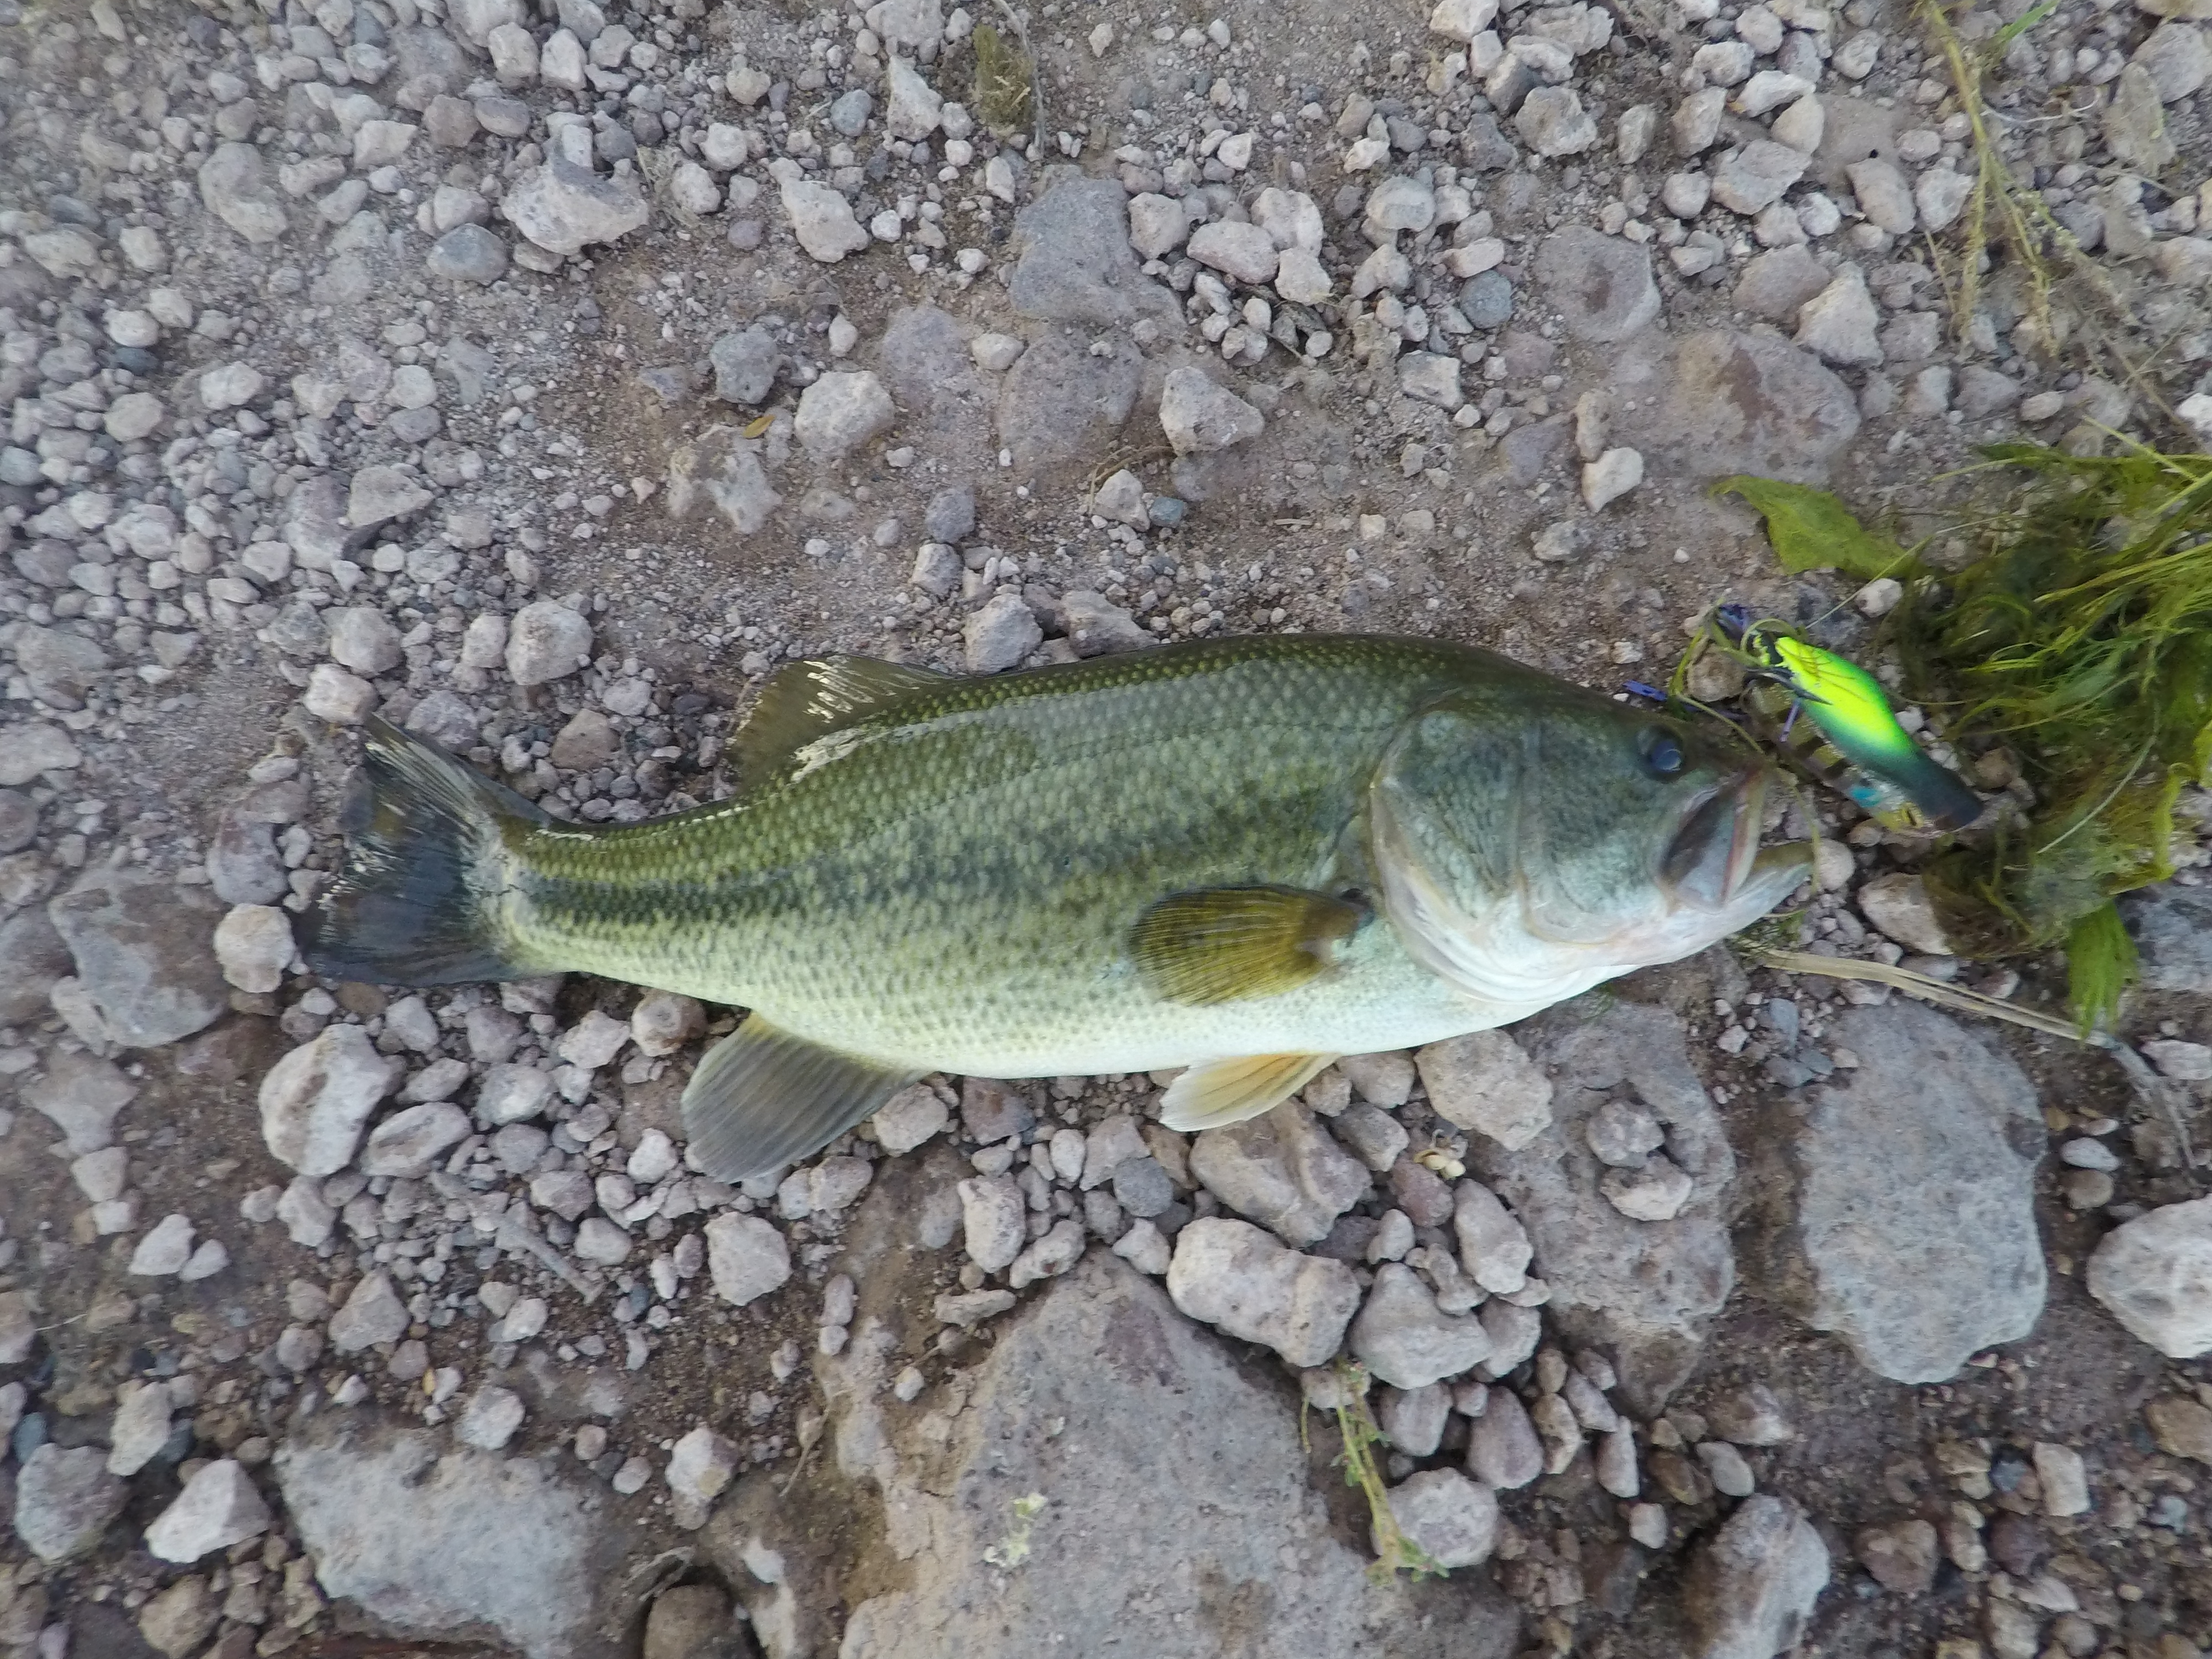 The final fishing frontier: Proper bait, lures can help in weed-choked ponds